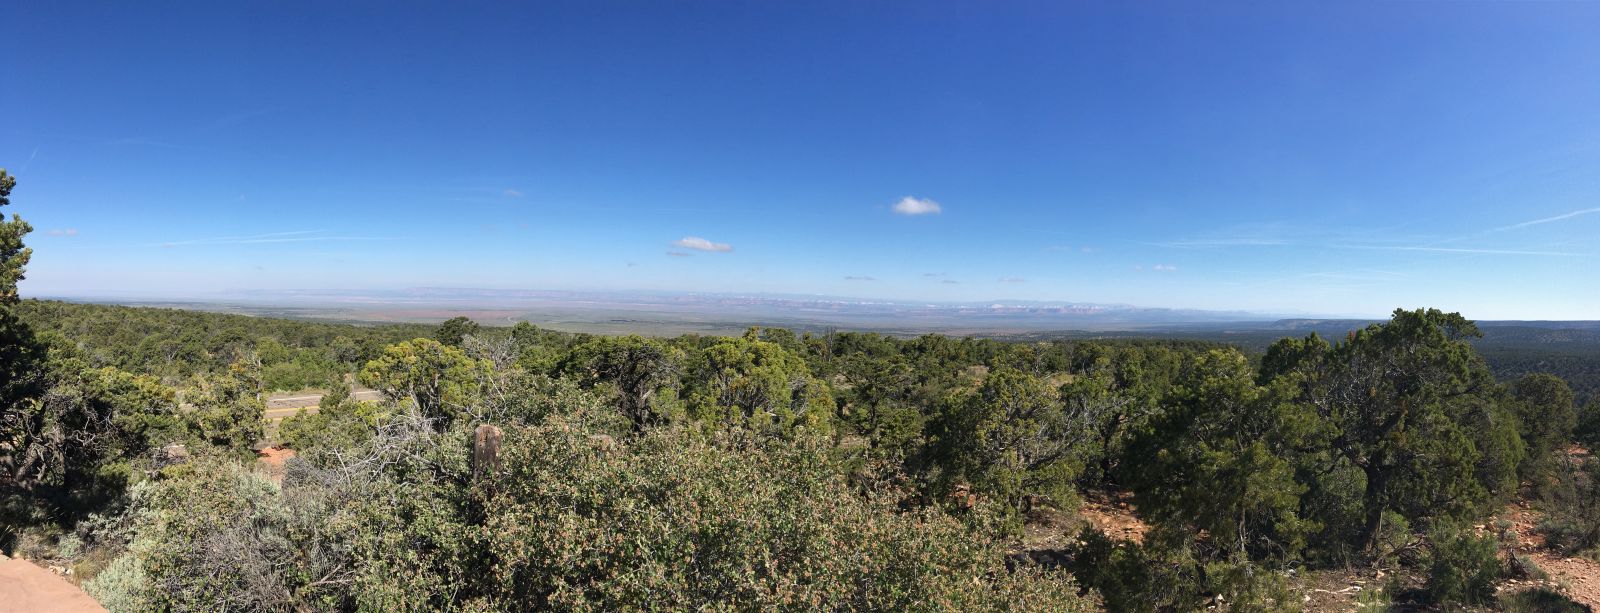 Looking north toward Utah and the Kanab and Kaiparowits Plateaus in the distance from the lookout on US89A in Arizona.